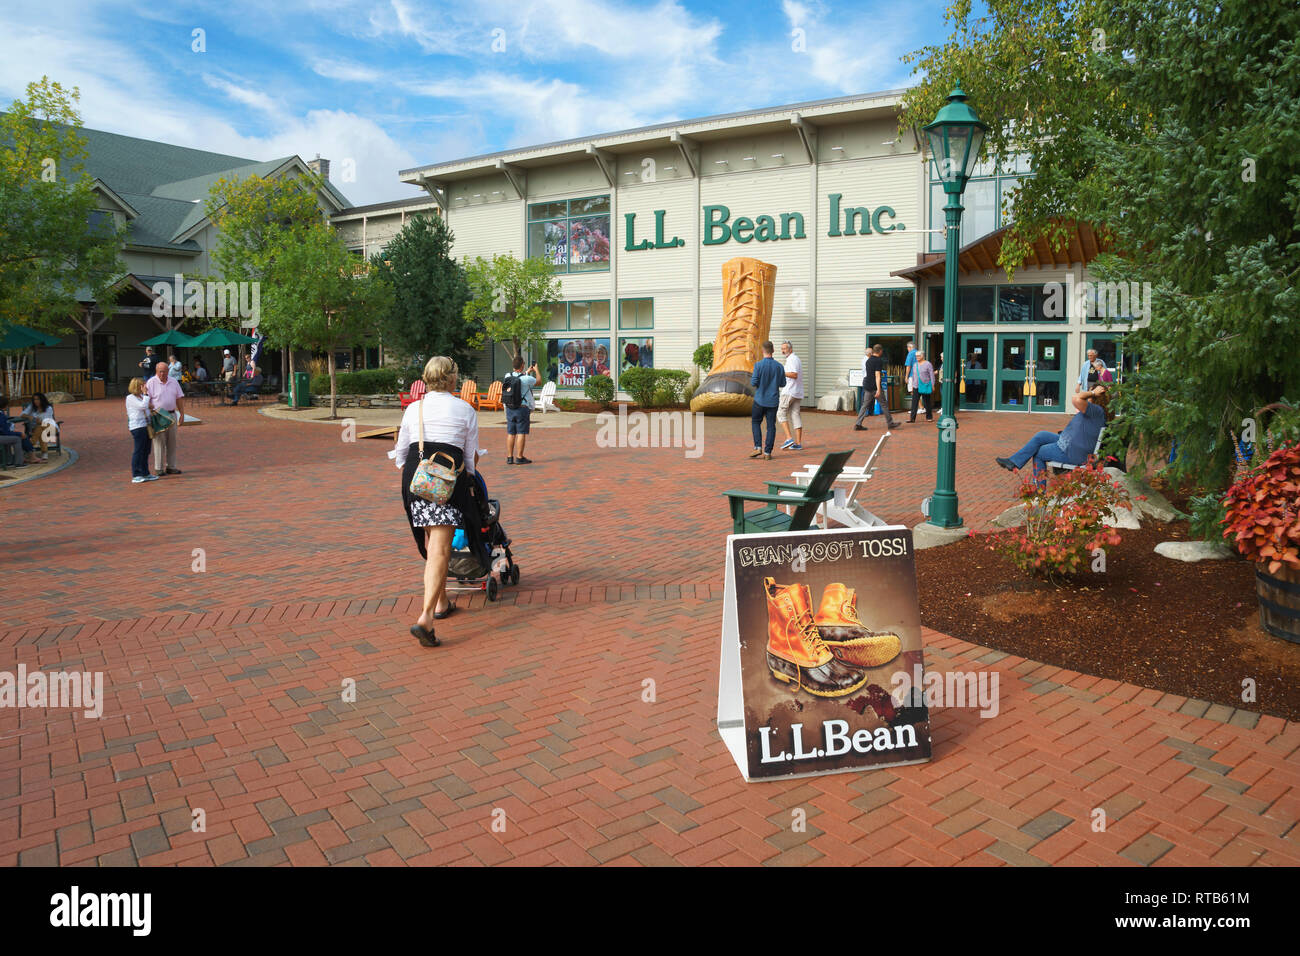 Exterior of LL Bean outdoors equipment store in Freeport, Maine, USA. Stock Photo